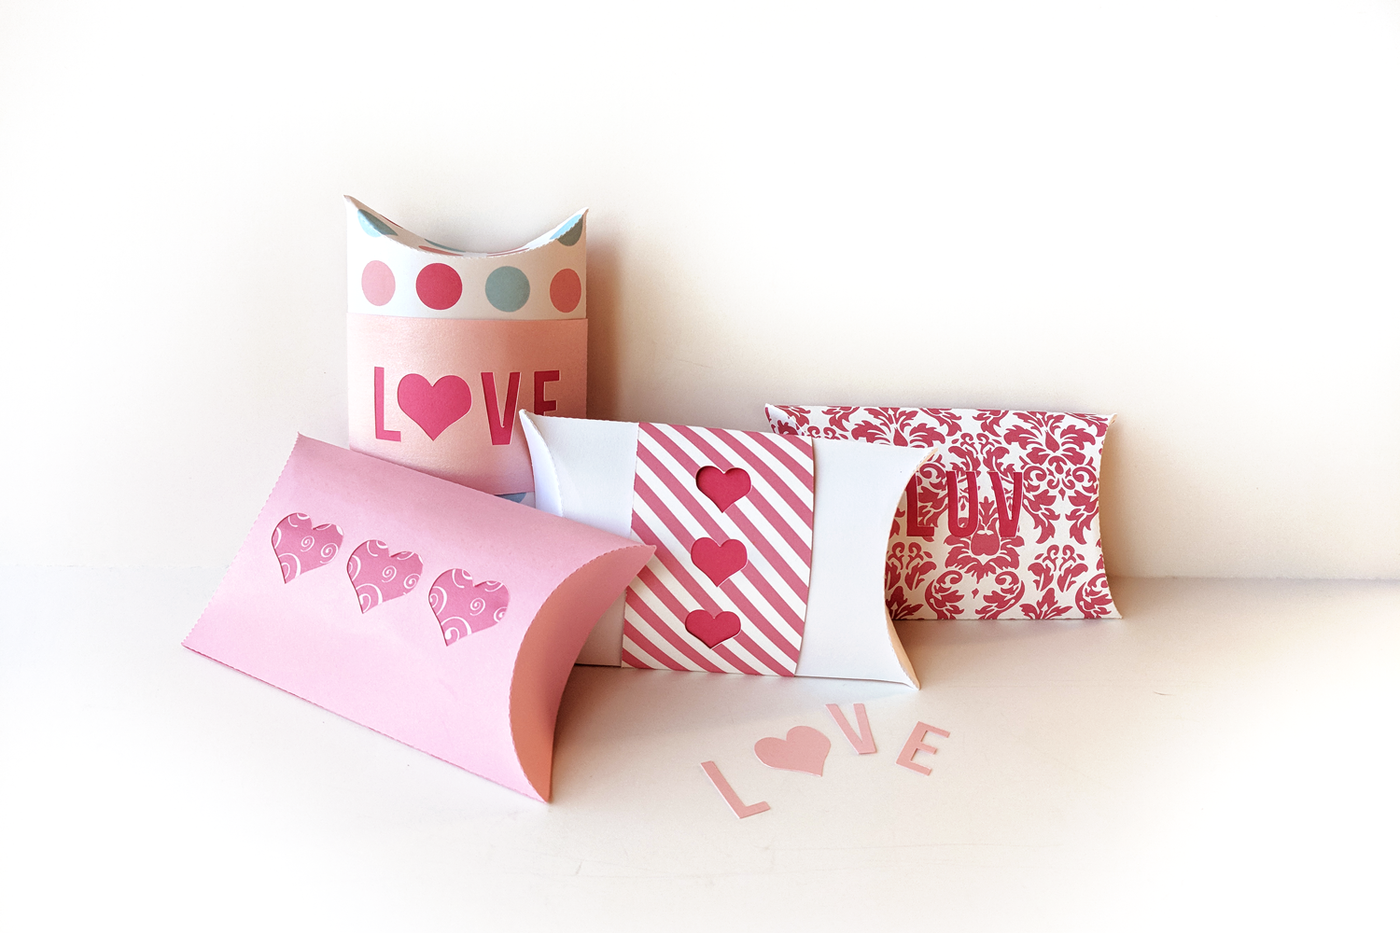 Set of 4 pillow boxes with a love theme. Some have hearts knocked out, others say "LOVE" or "LUV."